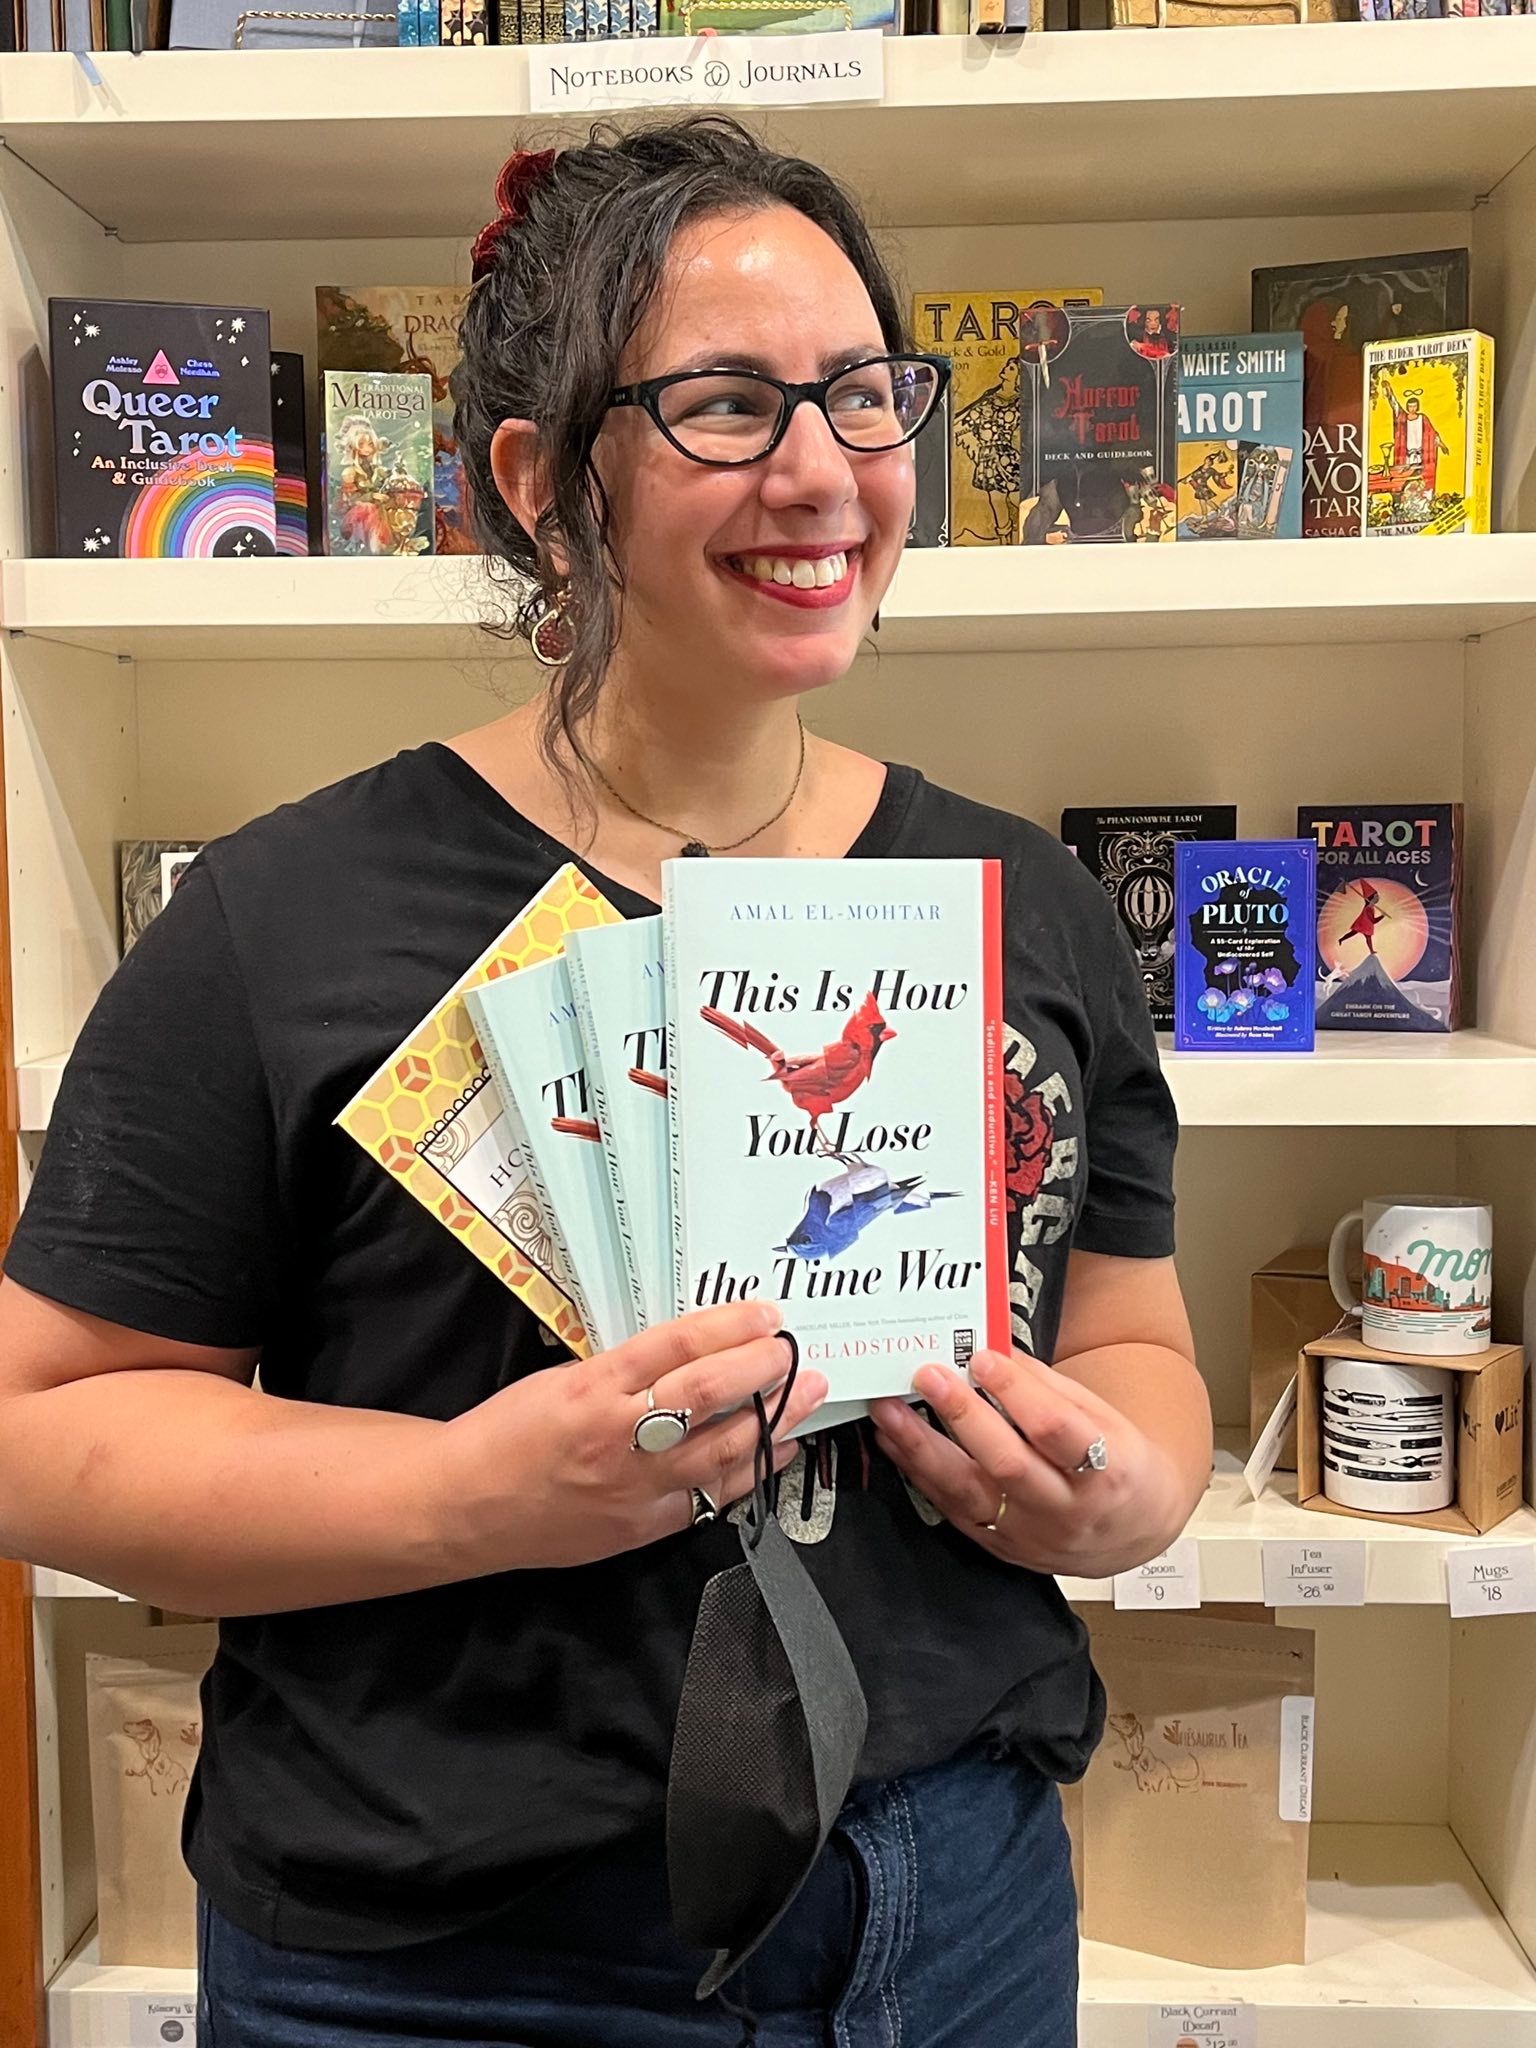 Photo of me from the waist up wearing a Hadestown t-shirt and looking off to the side, delighted and smiling, holding up three copies of This Is How You Lose the Time War and one copy of The Honey Month, fanned out together. Behind me is a shelf full of Tarot decks, tea mugs and tea. 